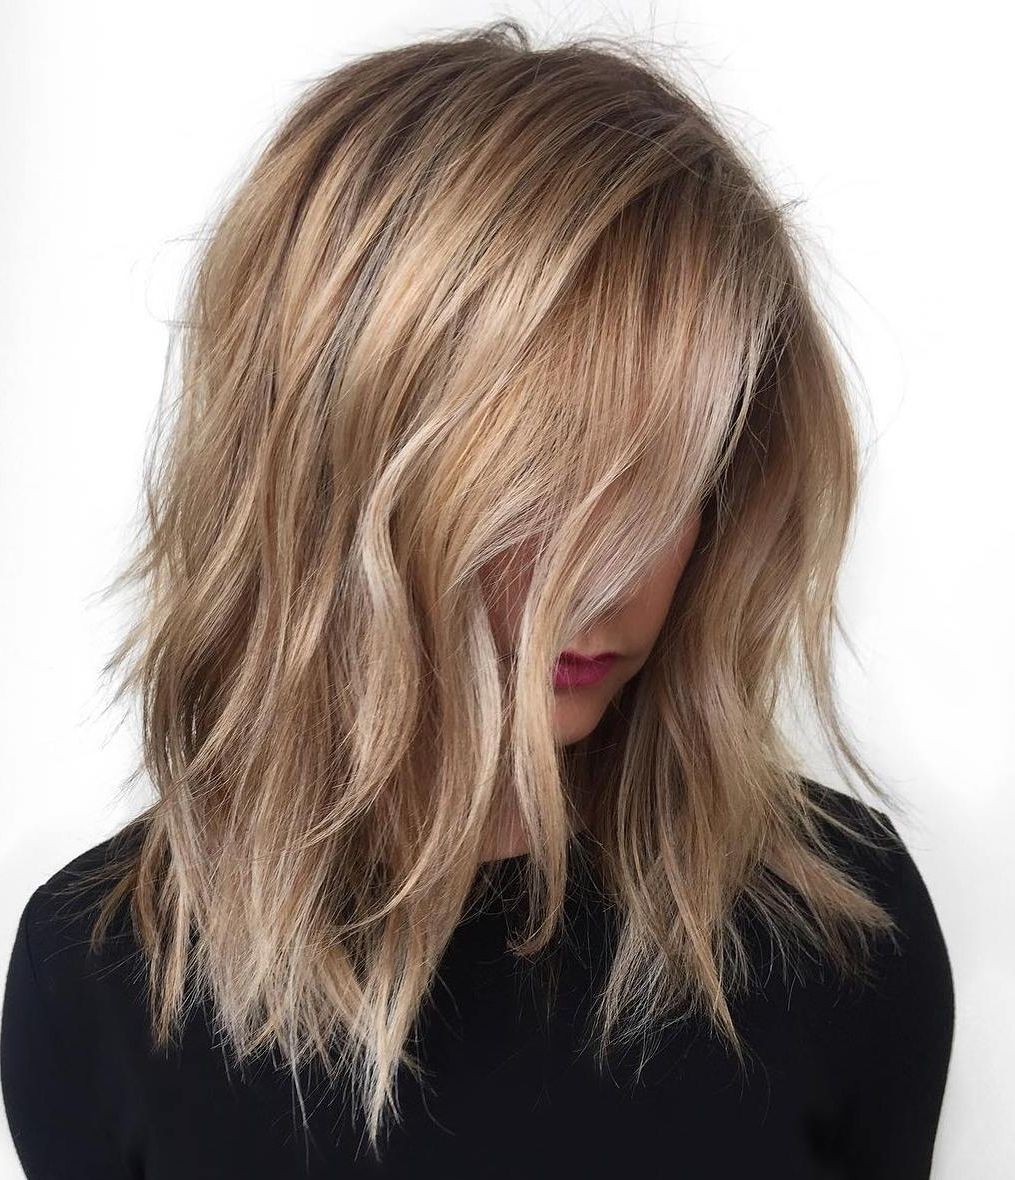 Popular Casual Bright Waves Blonde Hairstyles With Bangs Pertaining To 40 Styles With Medium Blonde Hair For Major Inspiration (View 15 of 20)